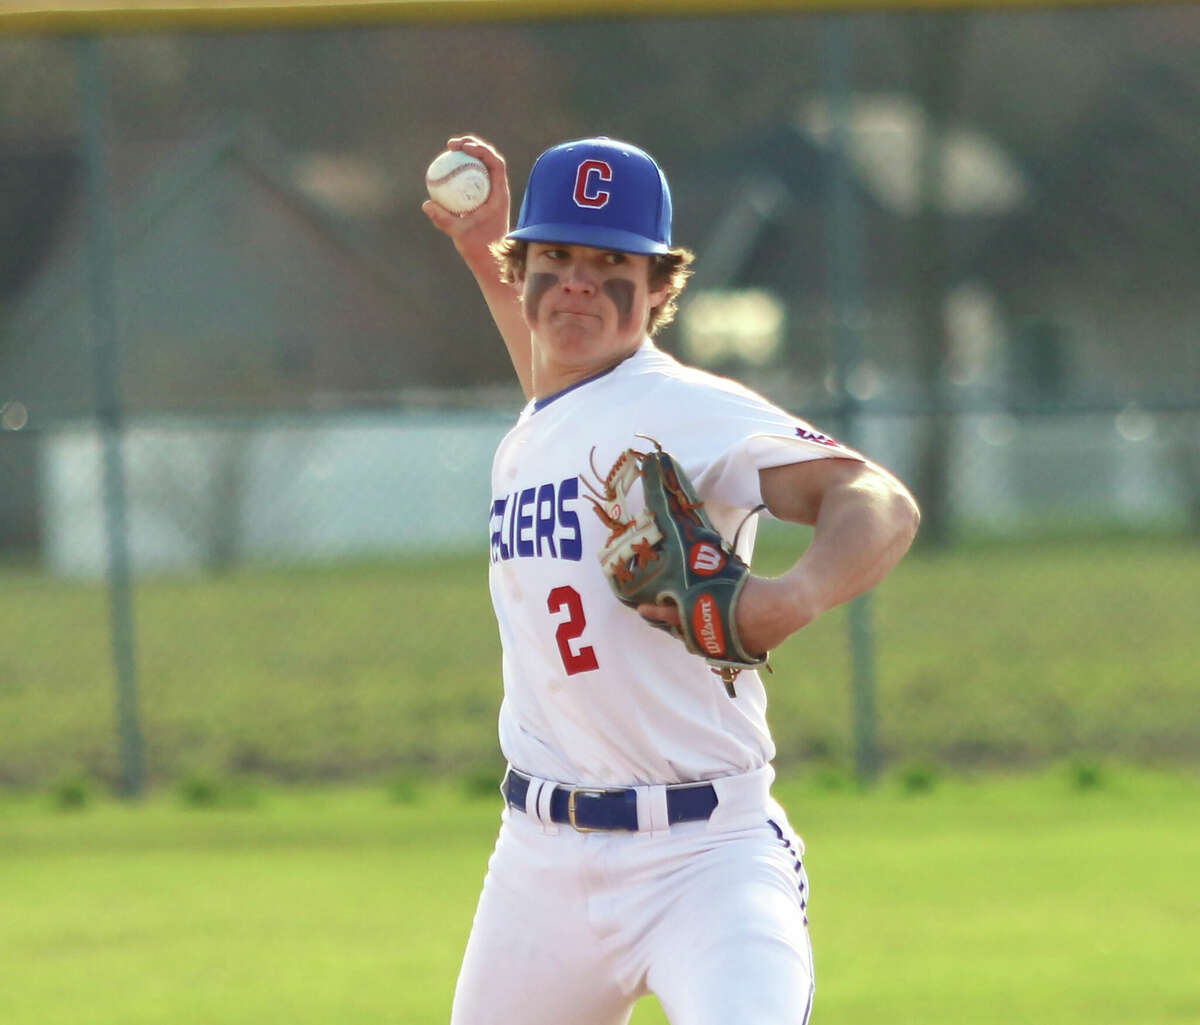 Carlinville's Henry Kufa pitches in his four-inning relief stint to pick up the win Monday in a nonconference baseball game against the Bulldogs in Staunton.